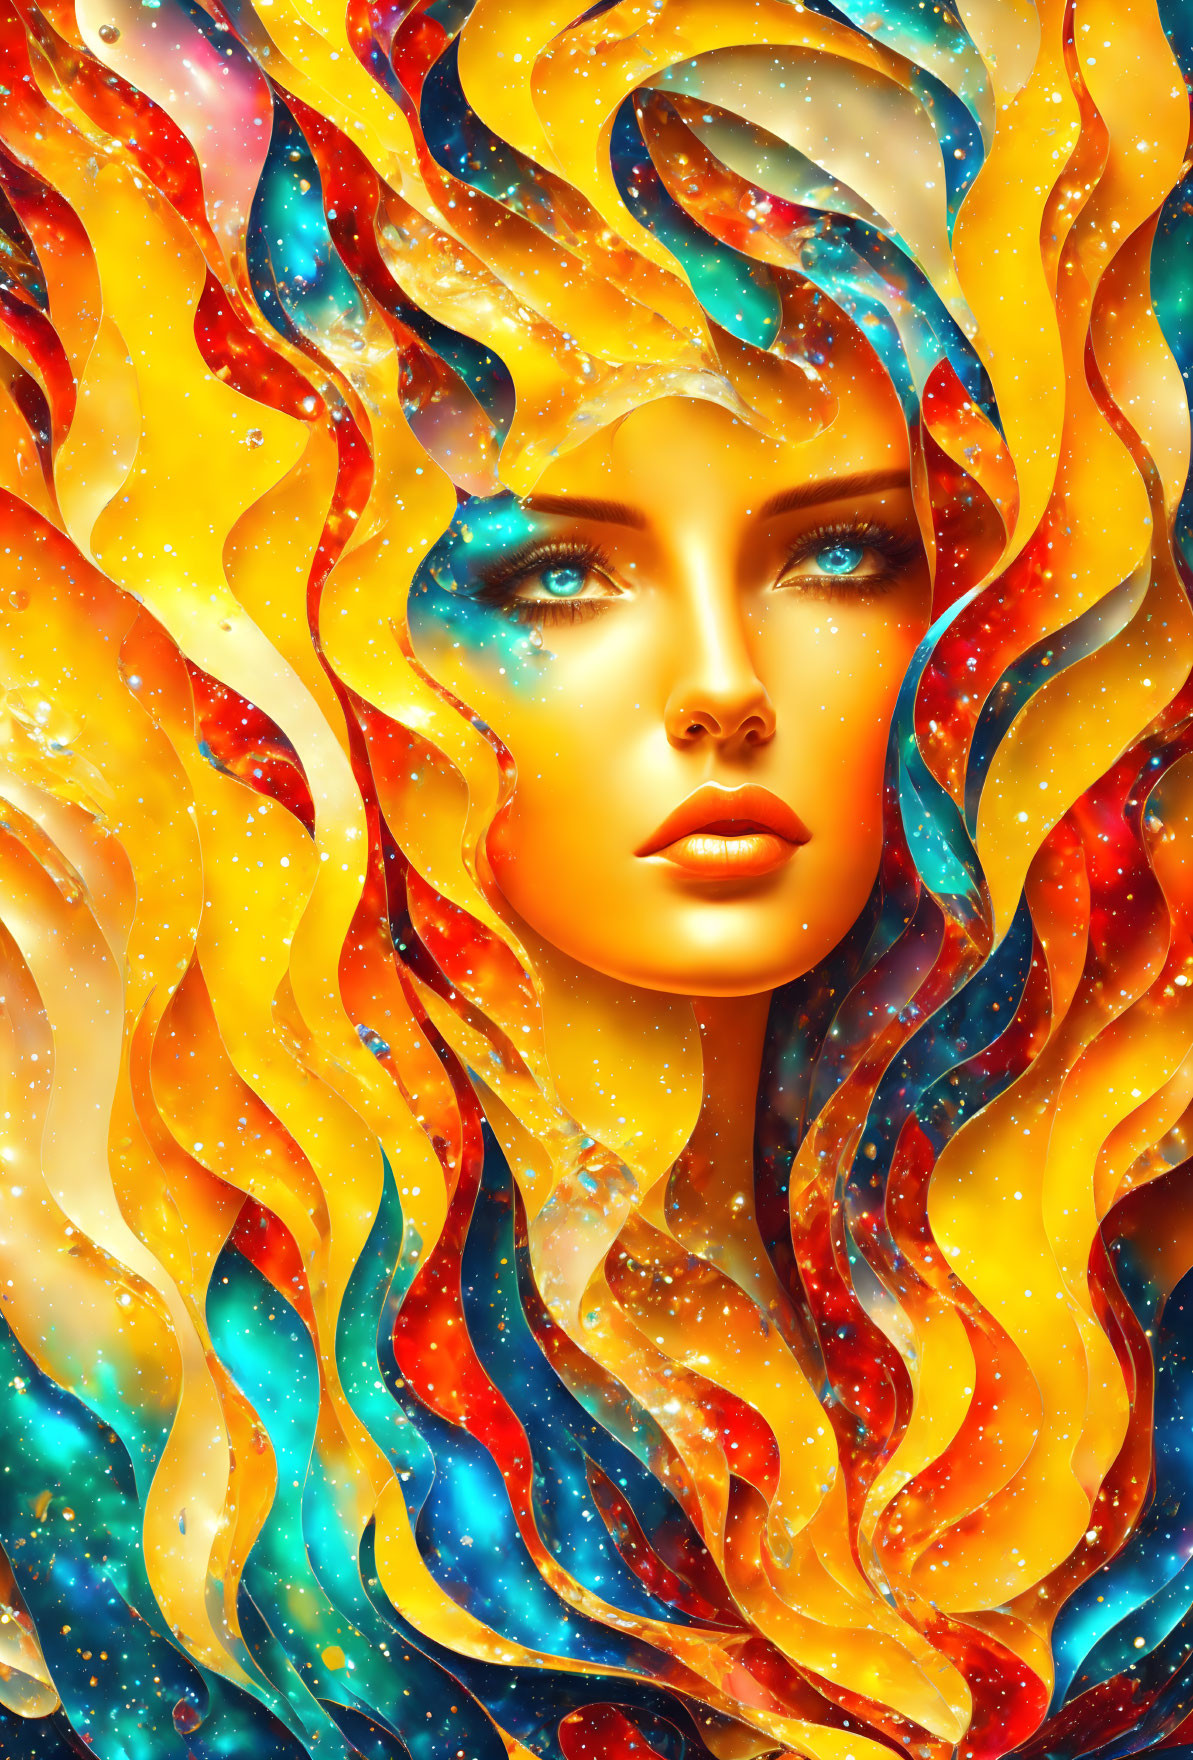 Colorful digital art portrait featuring cosmic elements merging with woman's hair and skin